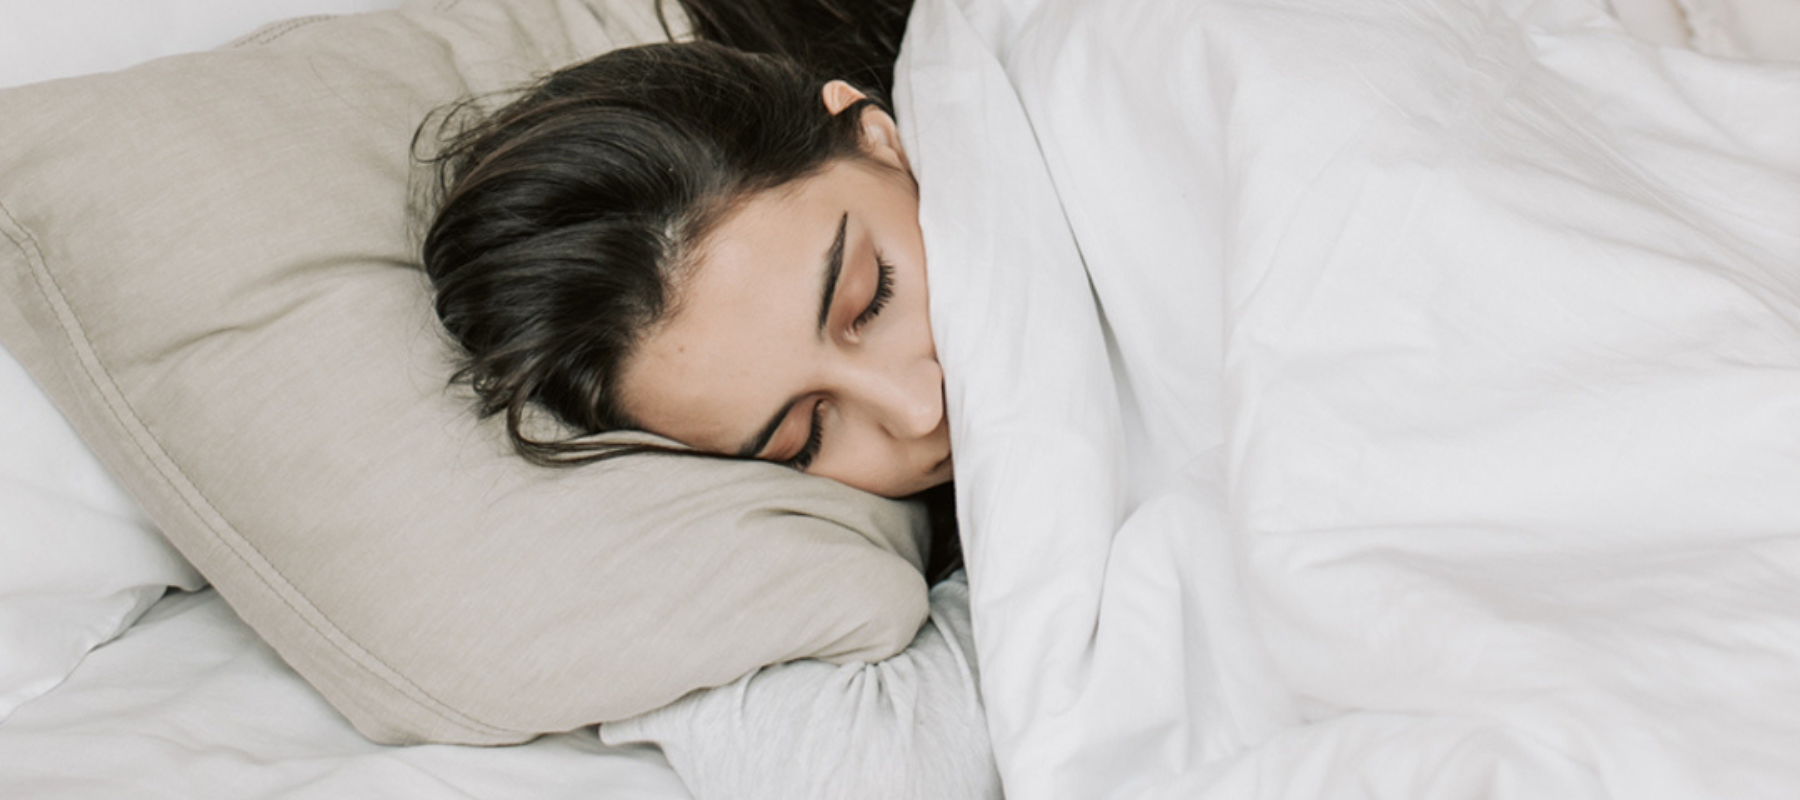 How Can Your Bedding Affect Your Mood?